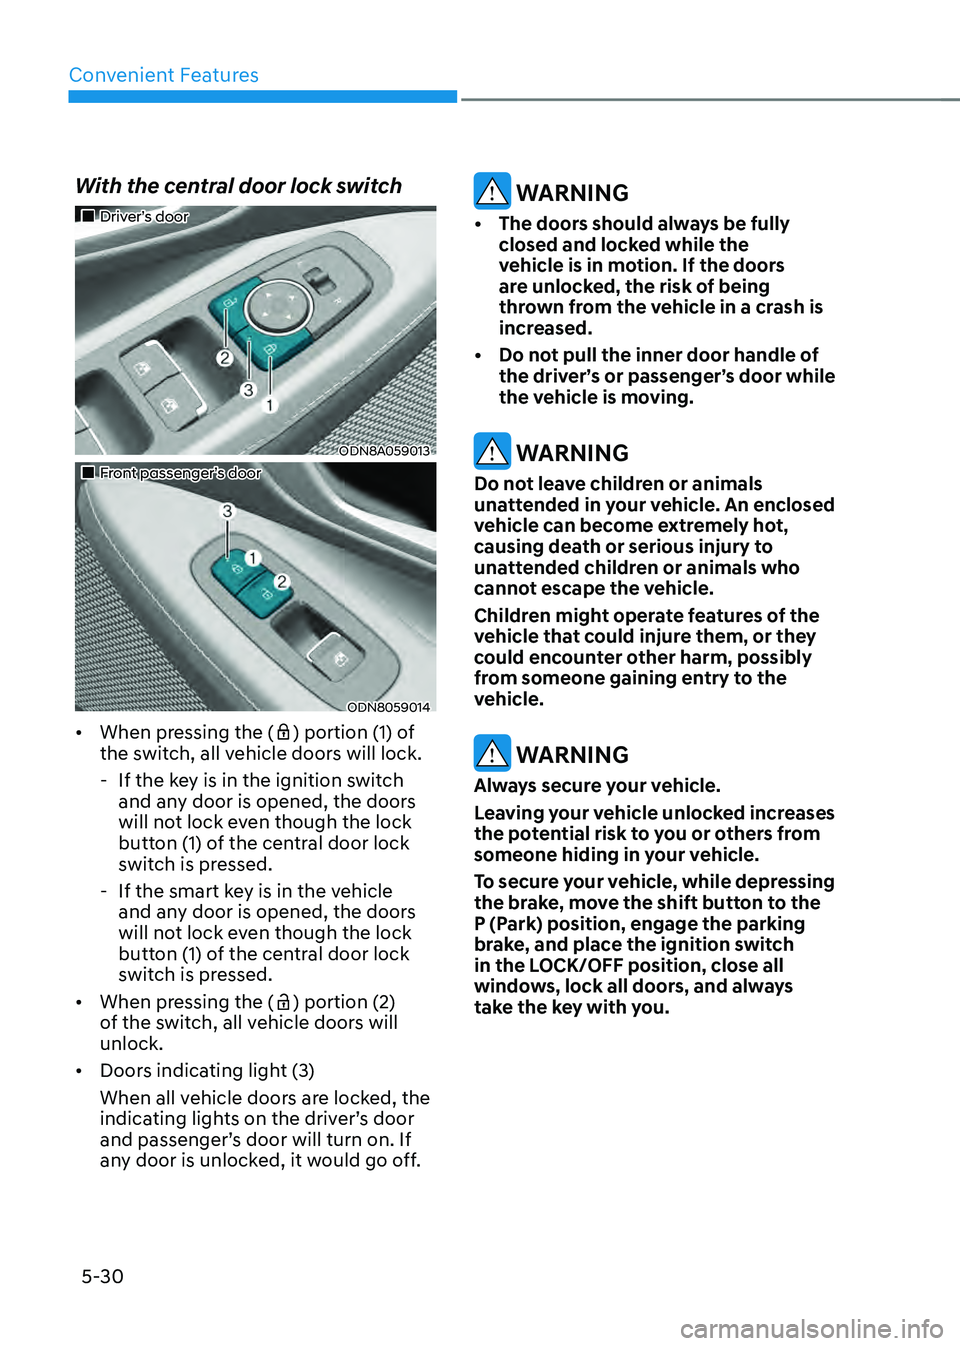 HYUNDAI SONATA HYBRID 2022 User Guide Convenient Features
5-30
With the central door lock switch
„„Driver’s door
ODN8A059013
„„Front passenger’s door
ODN8059014
•	When pressing the () portion (1) of 
the switch, 